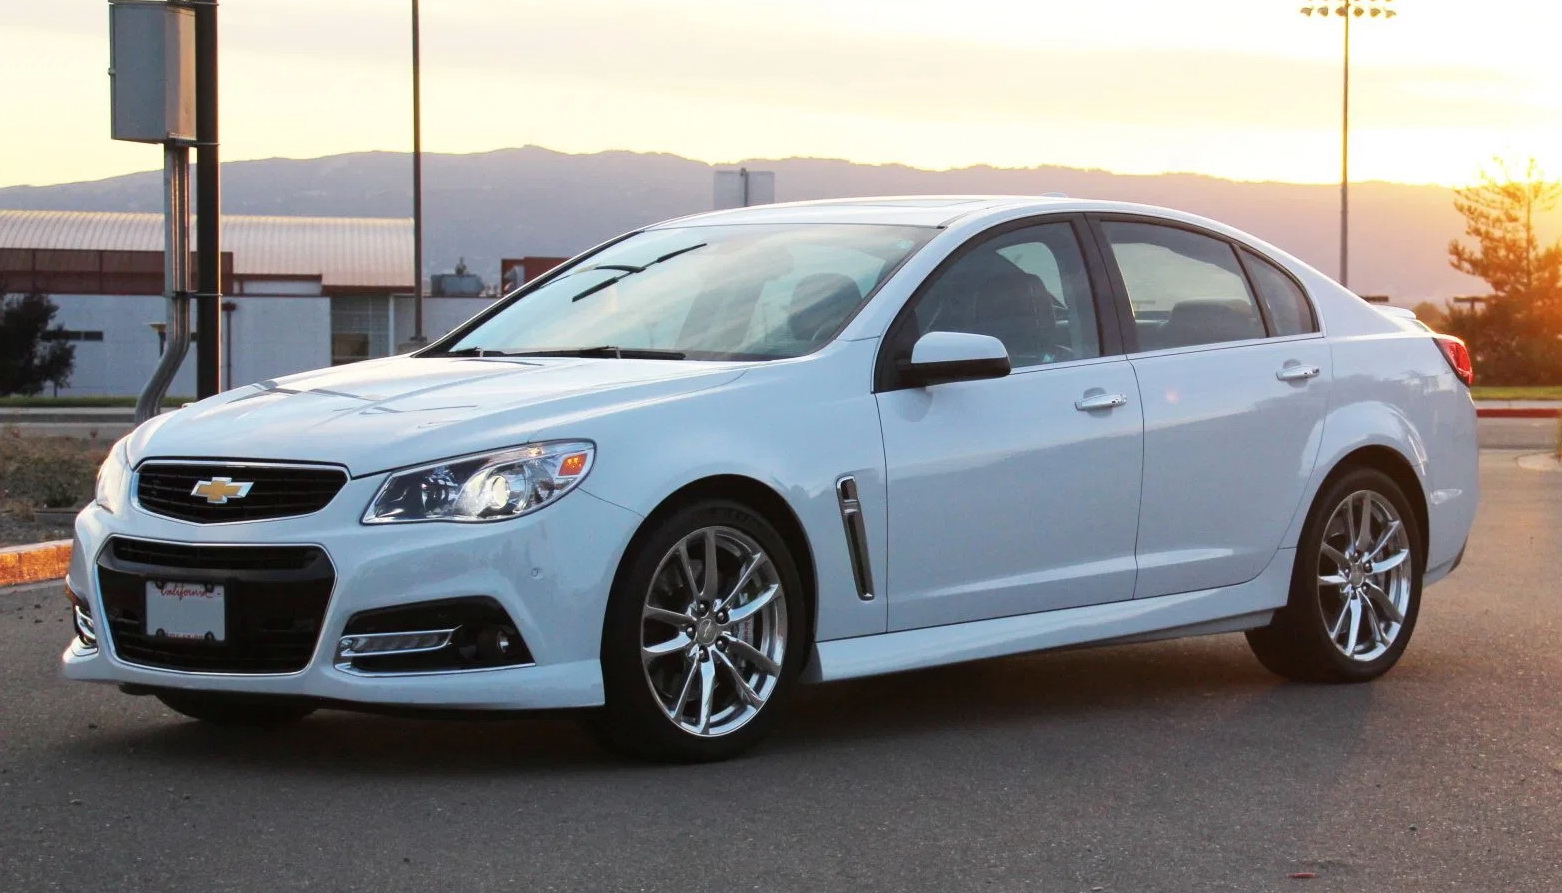 One-Owner 2015 Chevrolet SS Up for Grabs With 6.2L LS3 V8 and Six-Speed  Manual - autoevolution